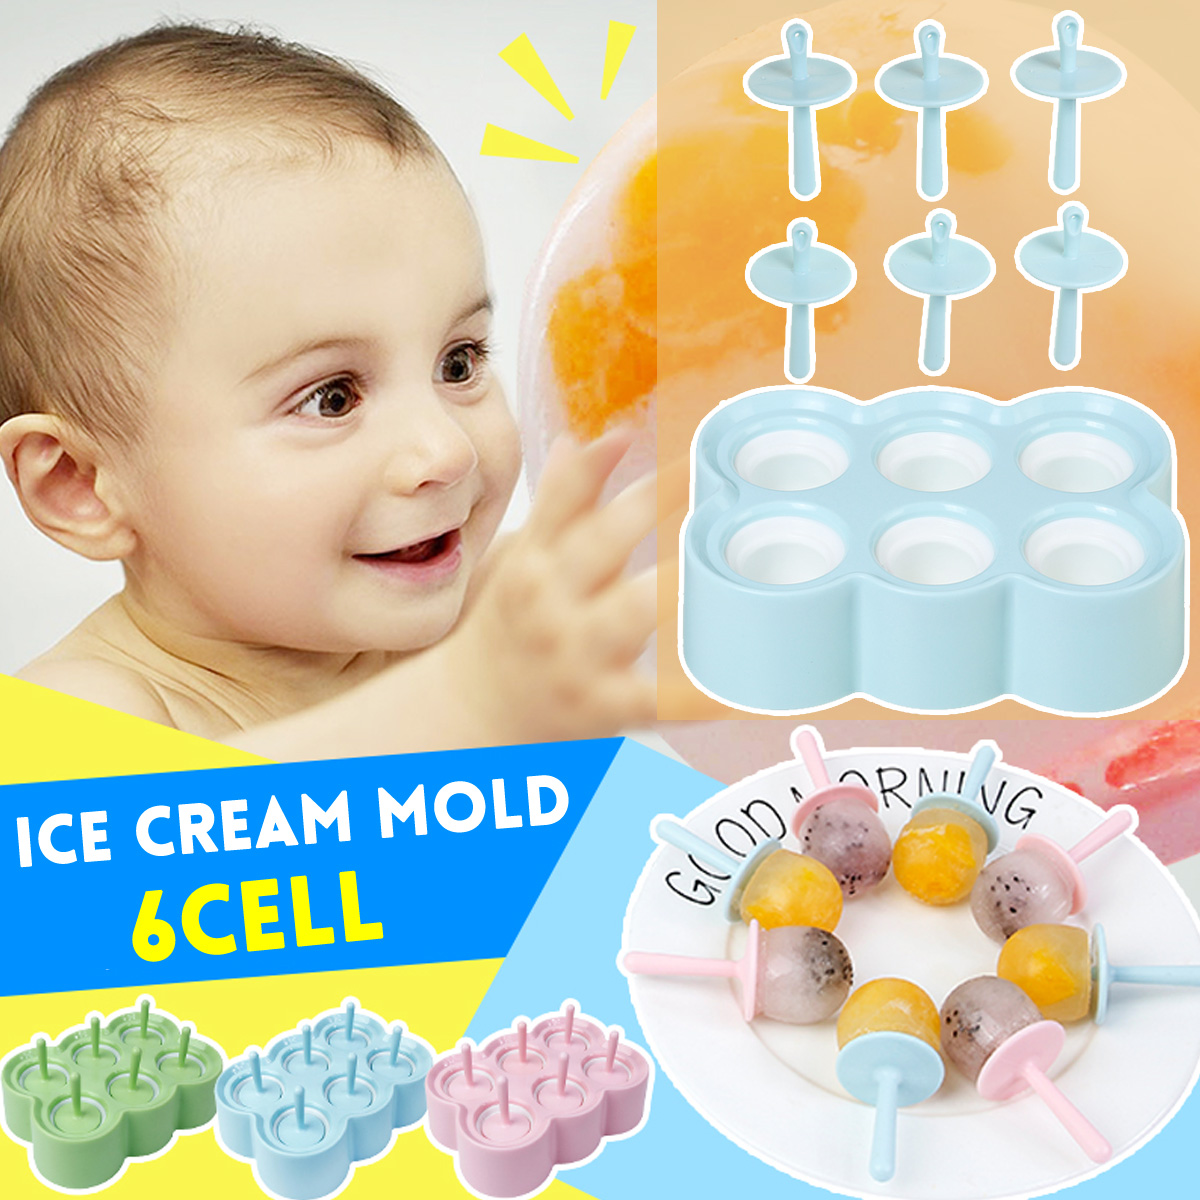 Portable-Food-Grade-Ice-Cream-Mold-Popsicle-Mould-Ball-Maker-Baby-DIY-Food-Supplement-Tools-for-Frui-1811799-1